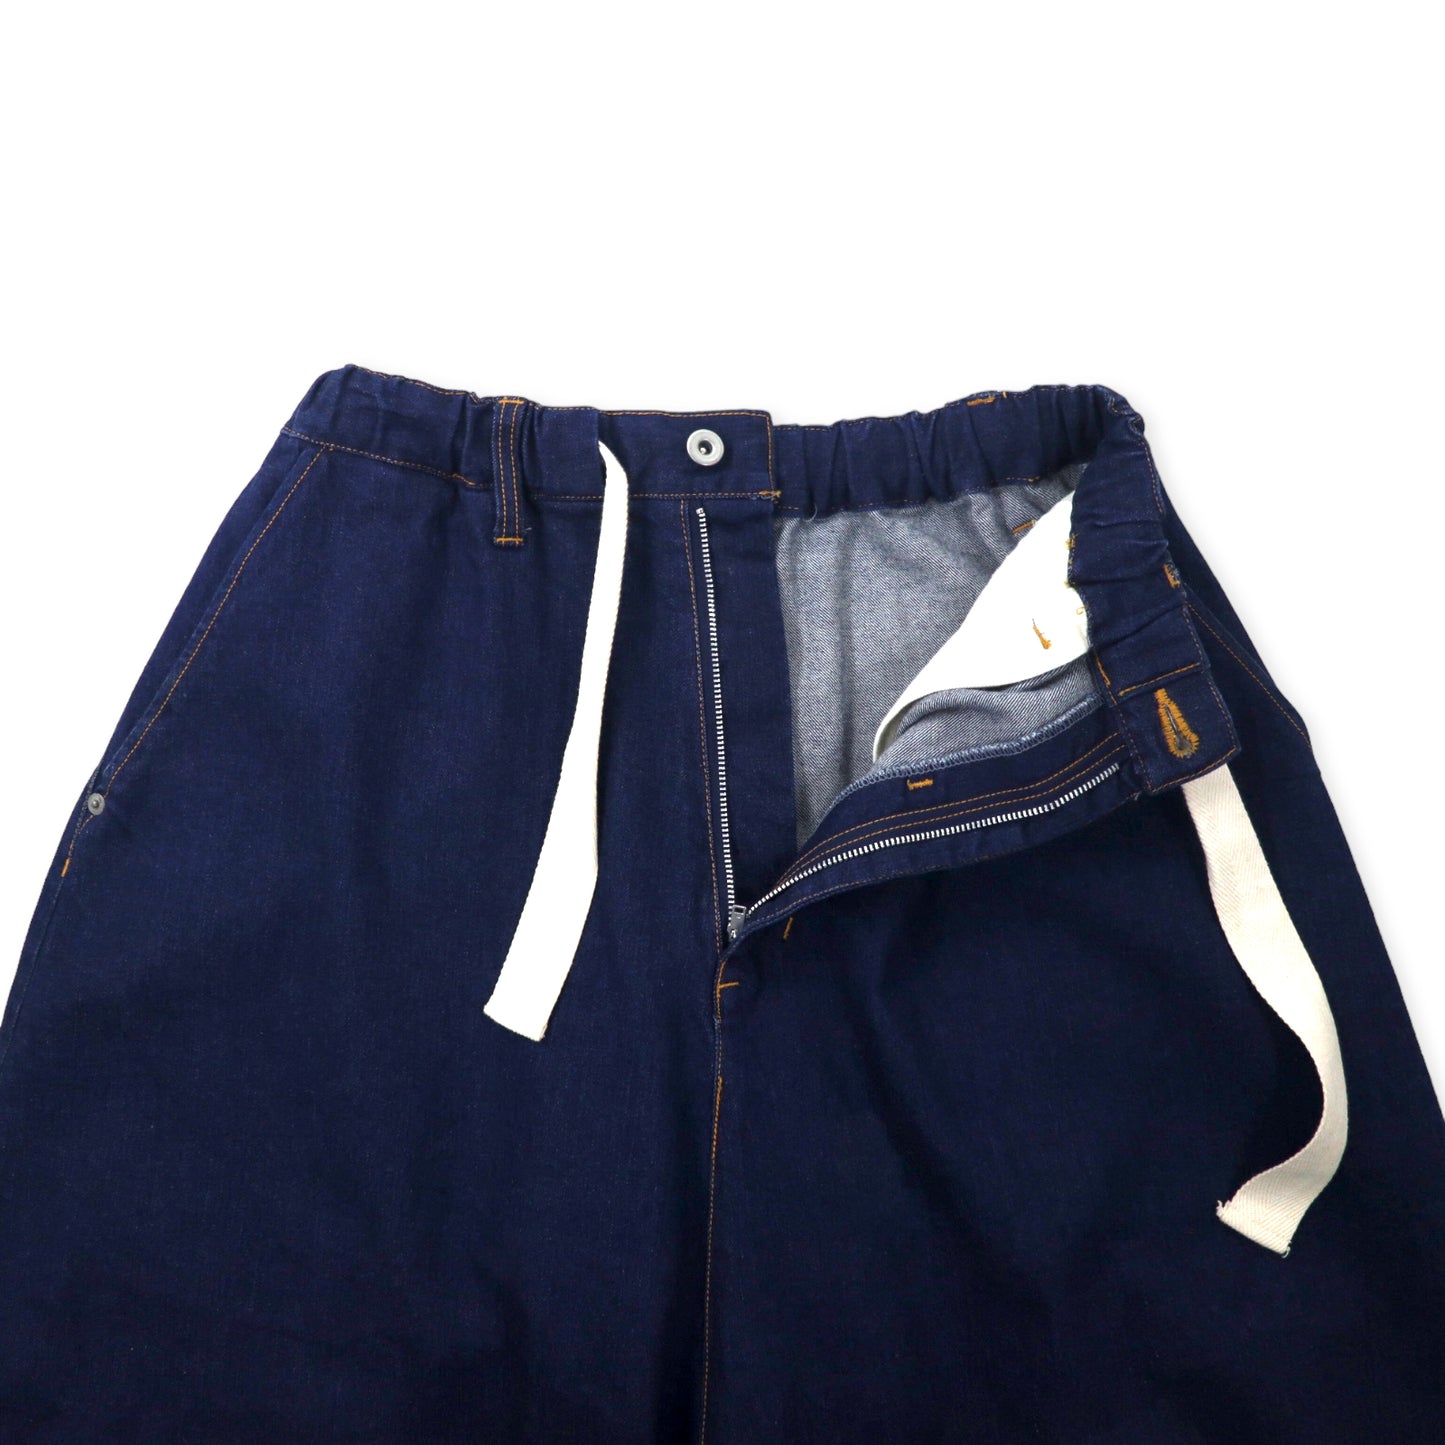 WHOWHAT Hakama PANTS Easy Denim Pants S Blue Cotton Wide Buggy 